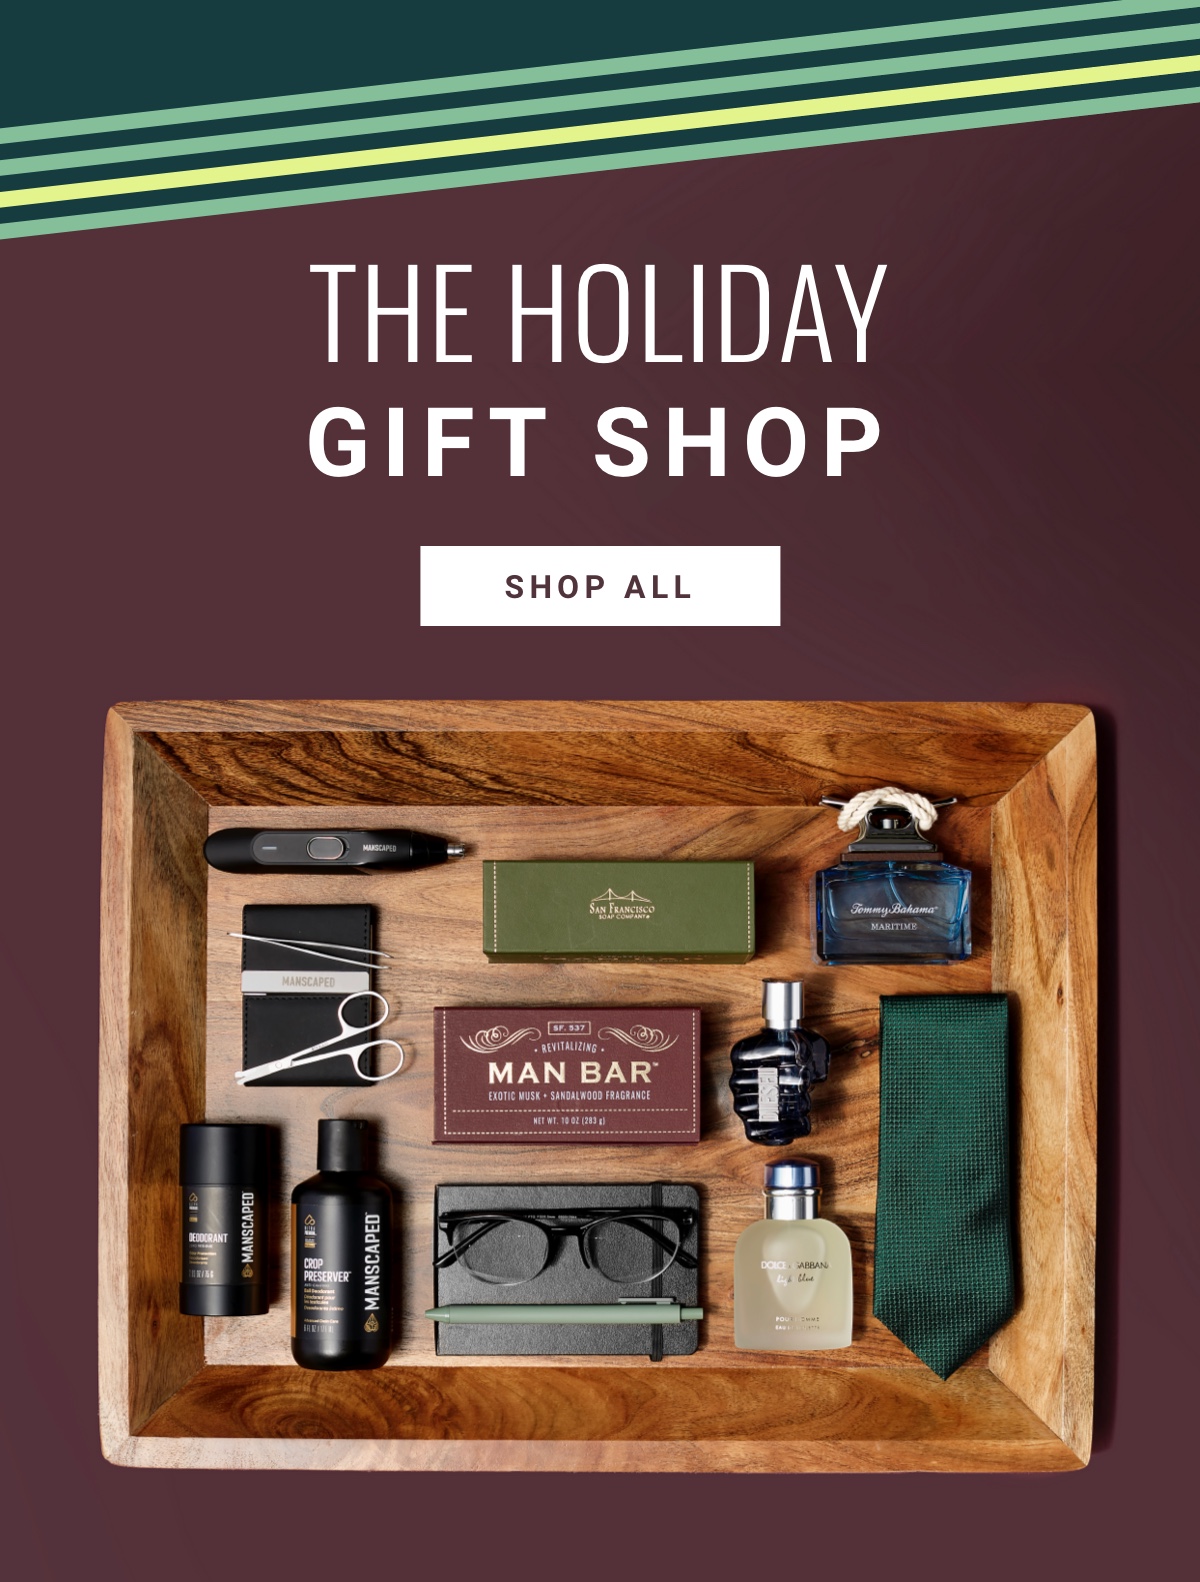 The Holiday Gift Shop Shop All